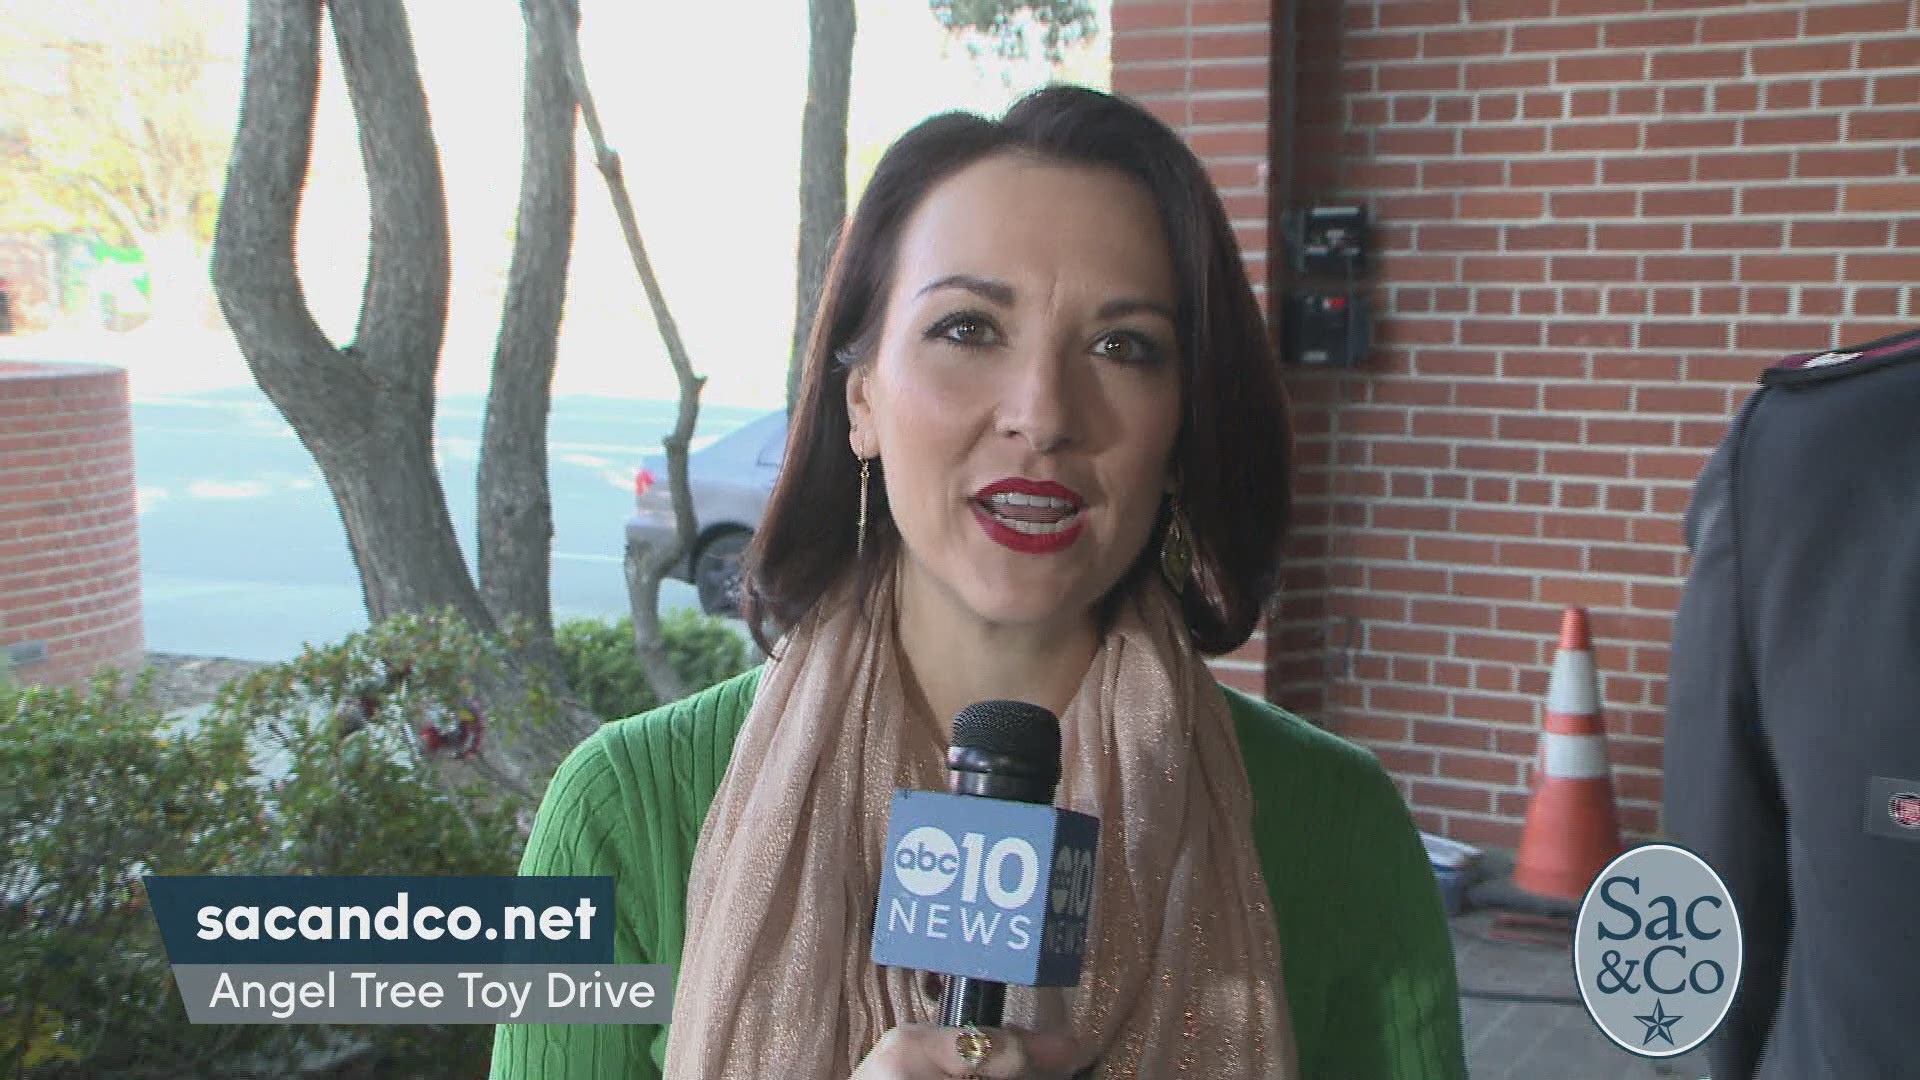 Mellisa speaks to the Salvation Army about the importance of giving back to the community through the Angel Tree. See how you can get involved!

Subscribe at: https://goo.gl/vai8Eu
Find ABC10 online: https://www.abc10.com/
Like ABC10 on Facebook: http